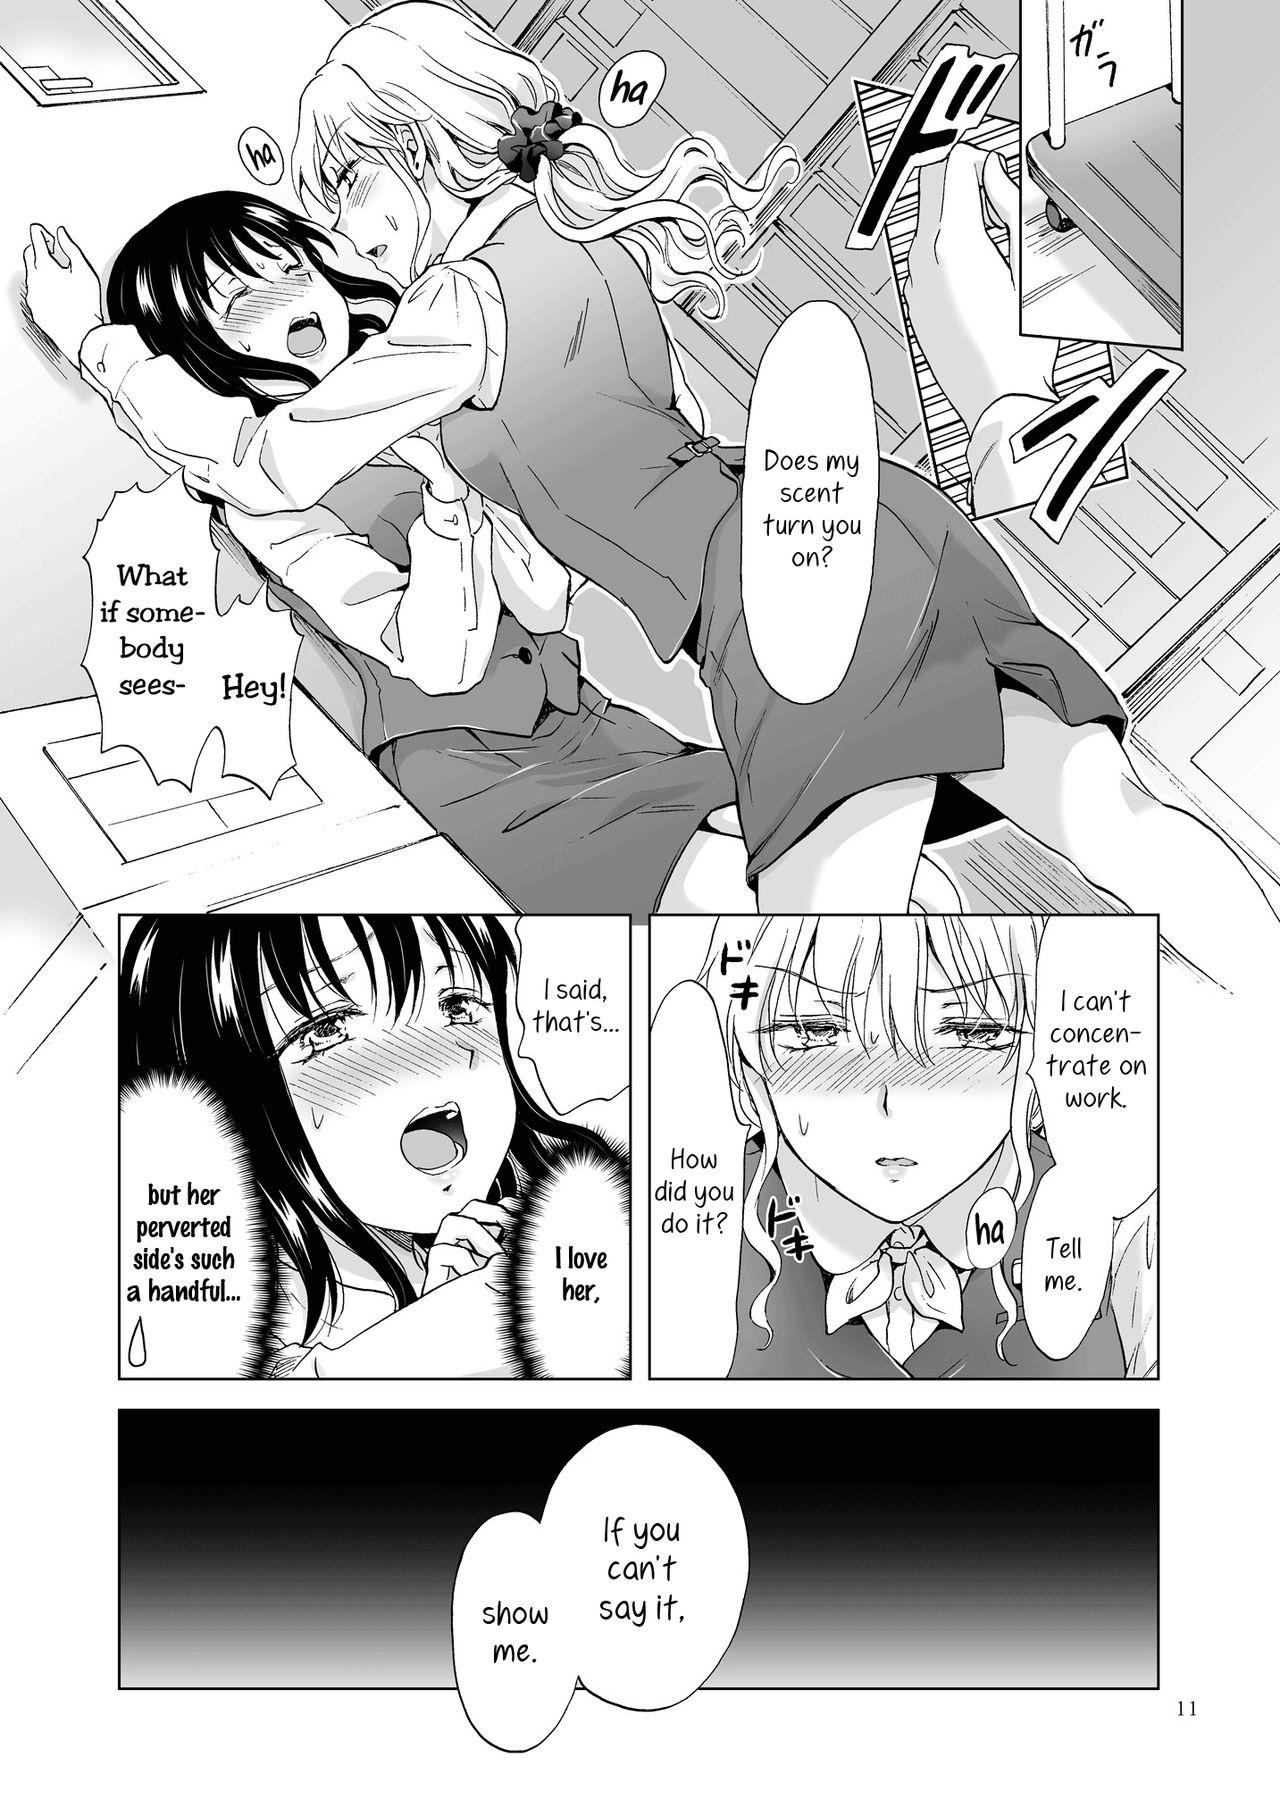 Long Hair Shiteru no, Misete | Show Me How You Do It - Original Tight Pussy - Page 11